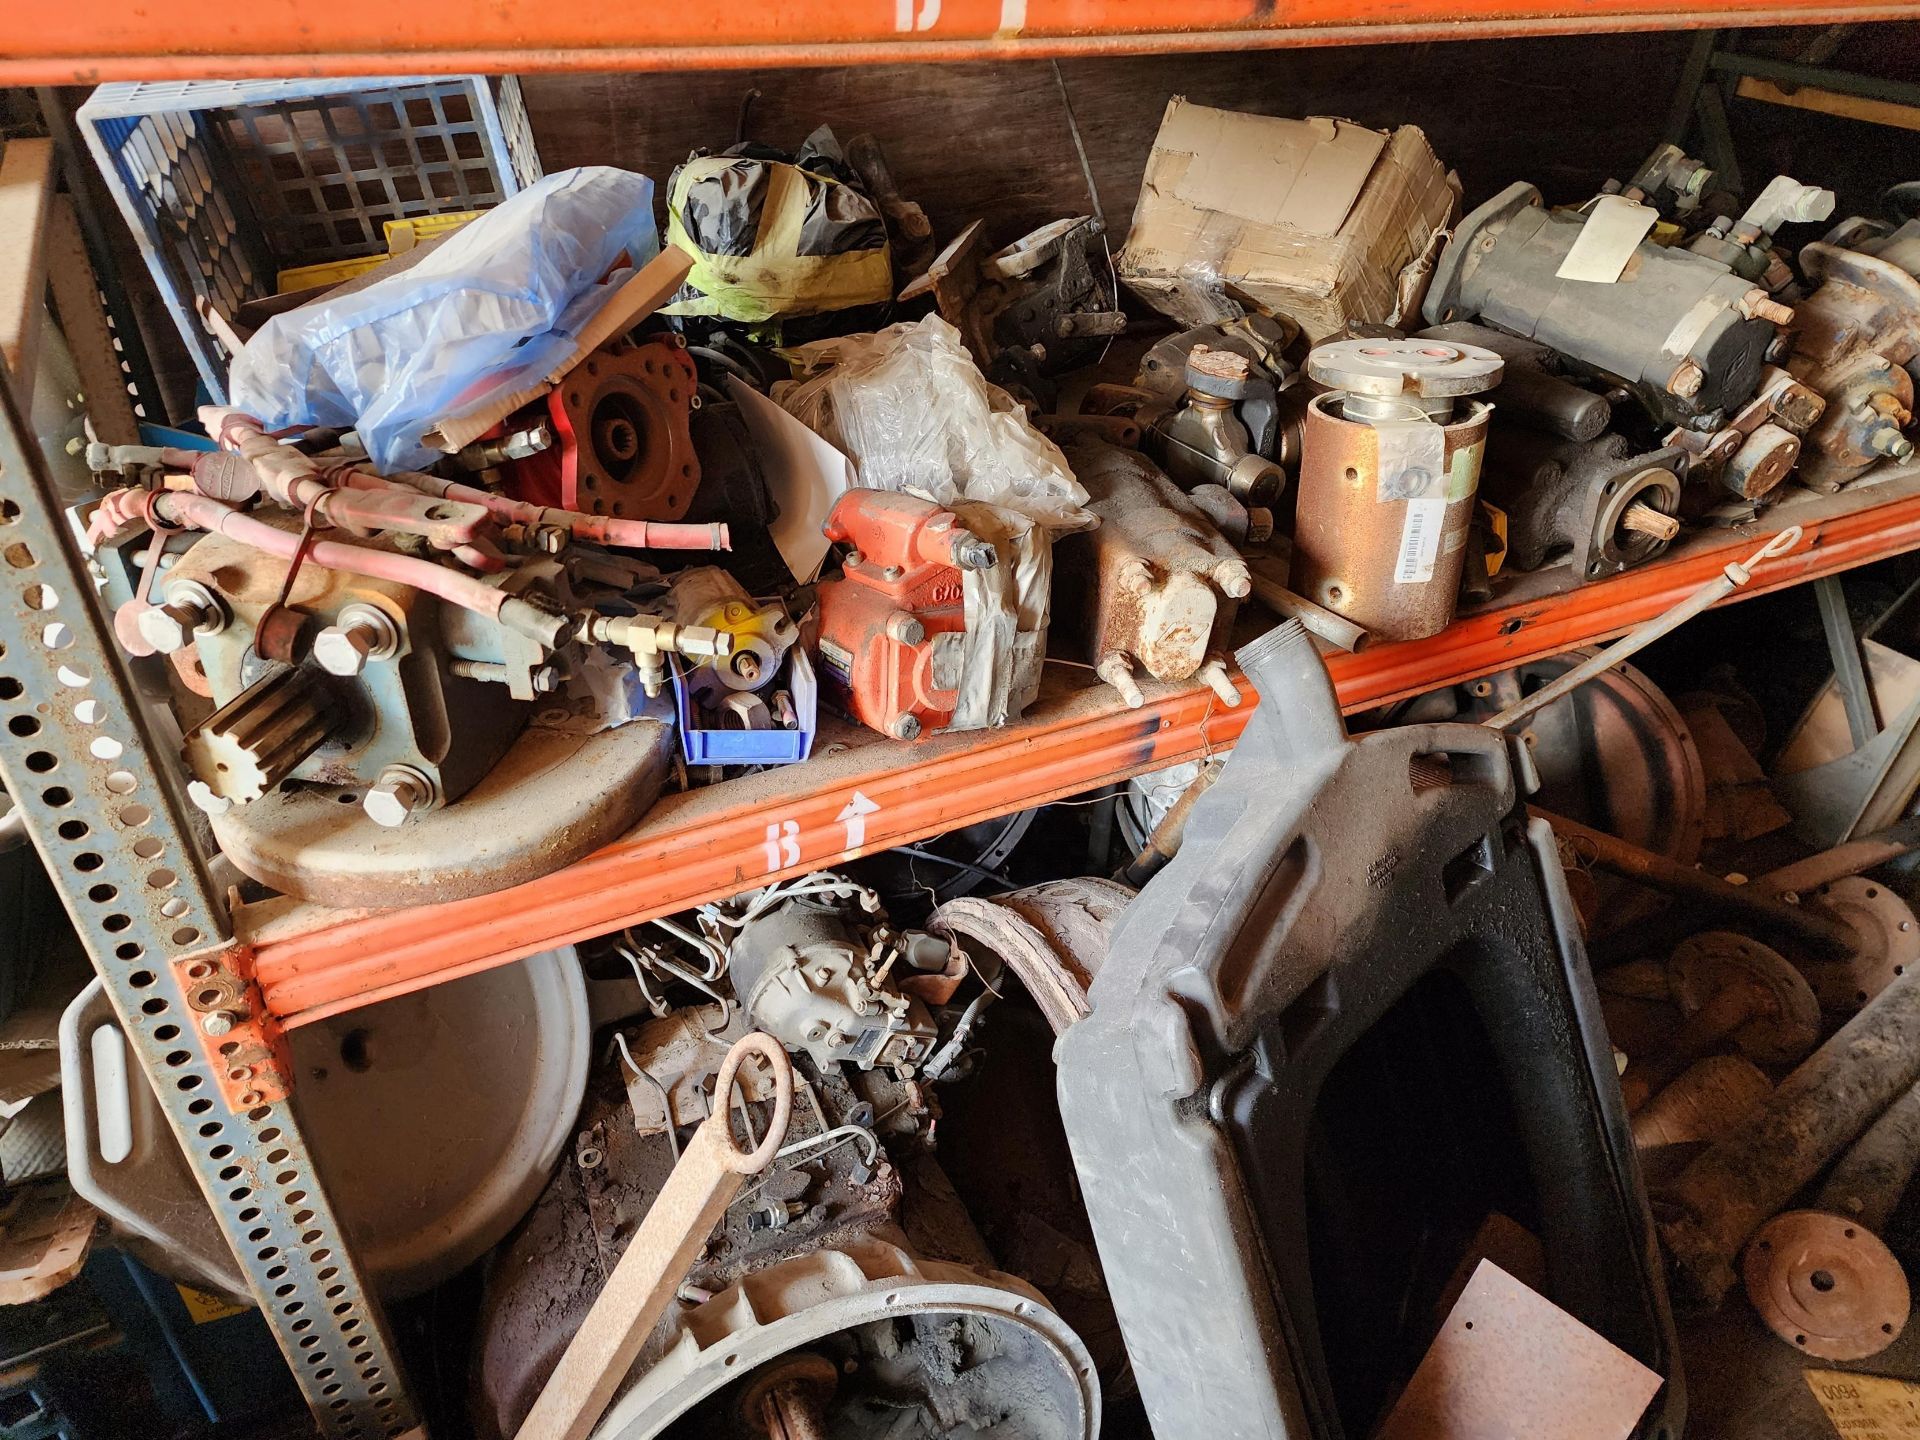 (LOT) CONTENTS OF TRAILER - TRUCK PARTS, TRANSMISSIONS, GEAR CASES AND OTHER - Image 14 of 16